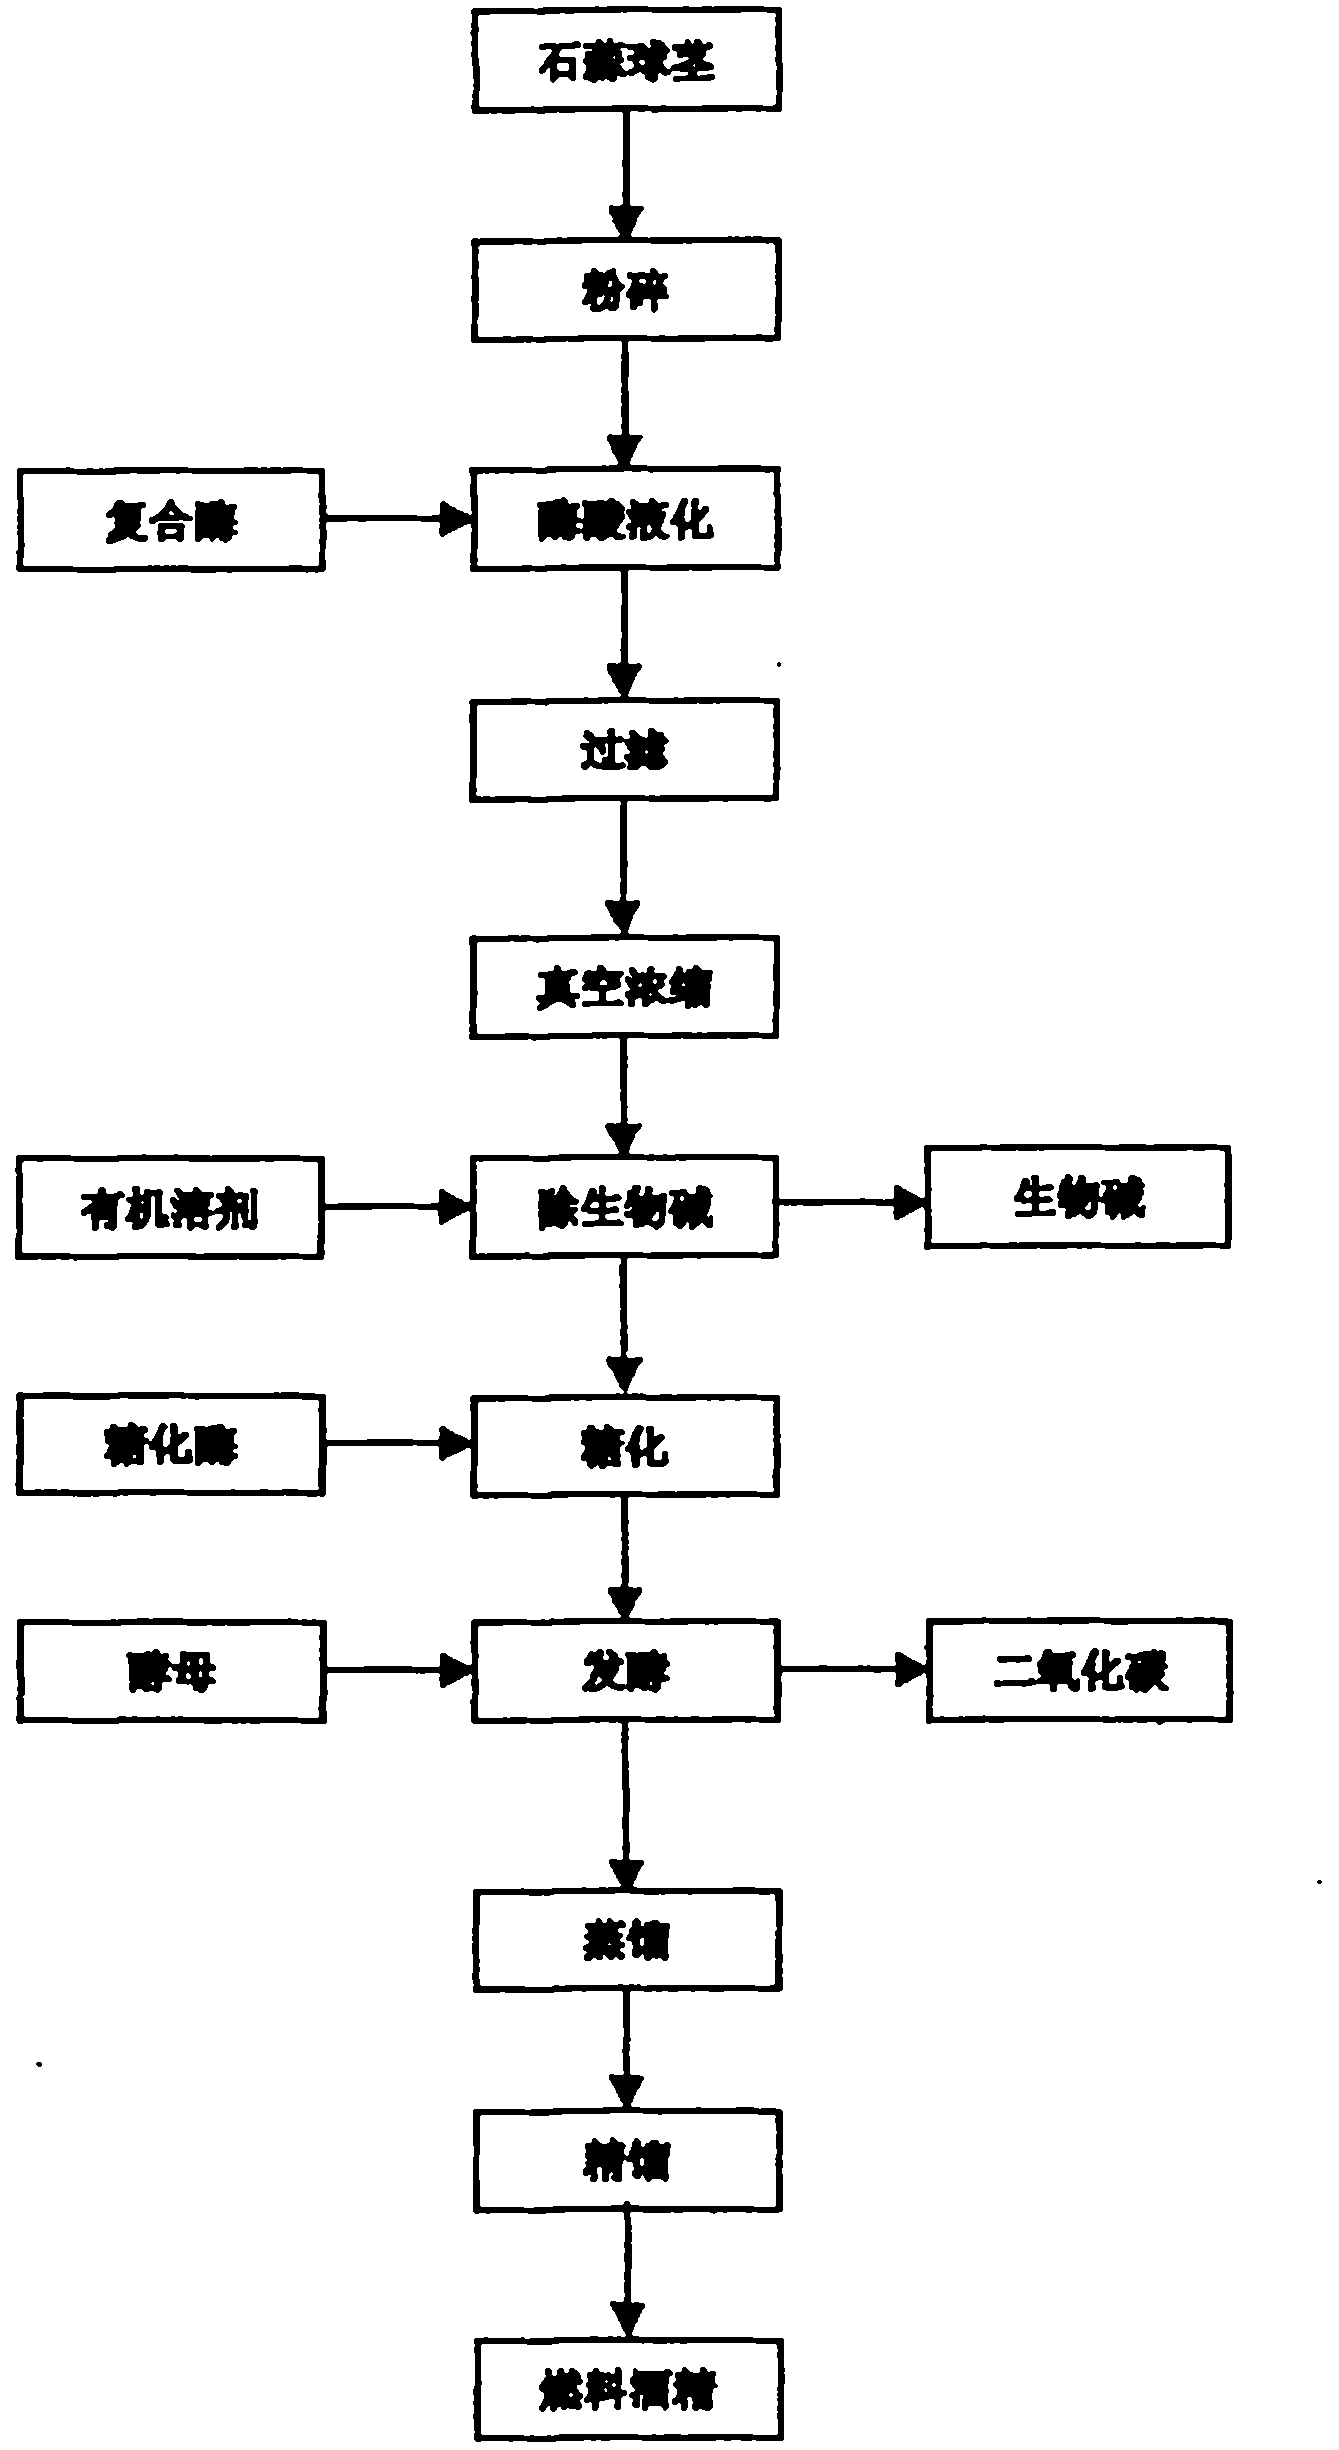 Method for producing fuel ethanol by using lycoris plants